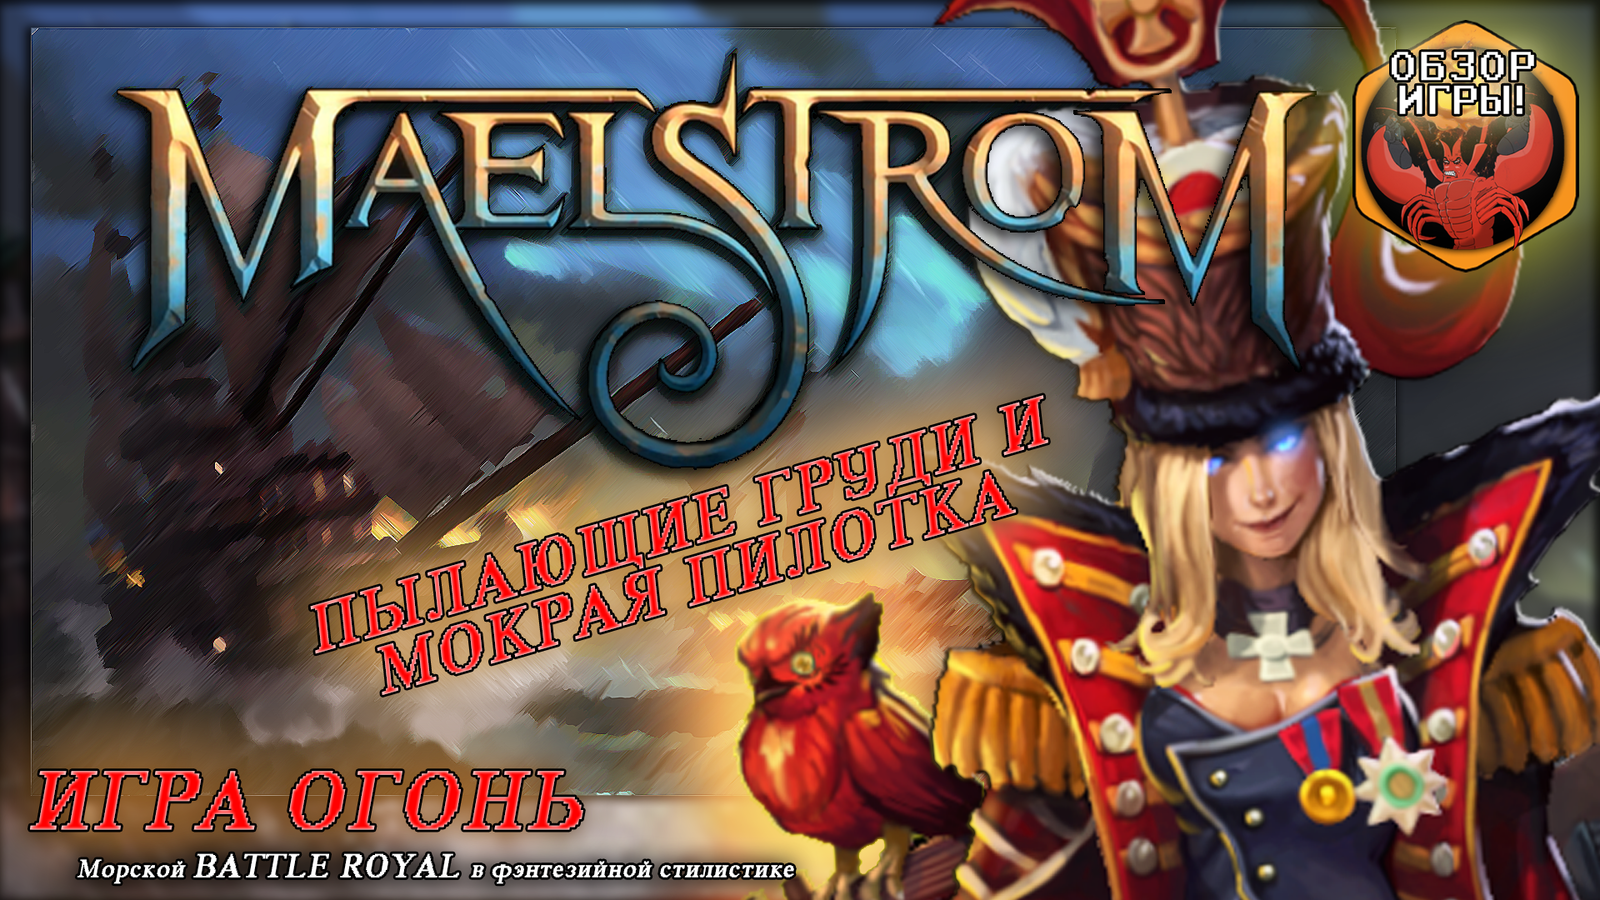 Maelstrom - game review - My, Maelstrom, Early access, Battle royale, Инди, Games, Fantasy, Longpost, , Video